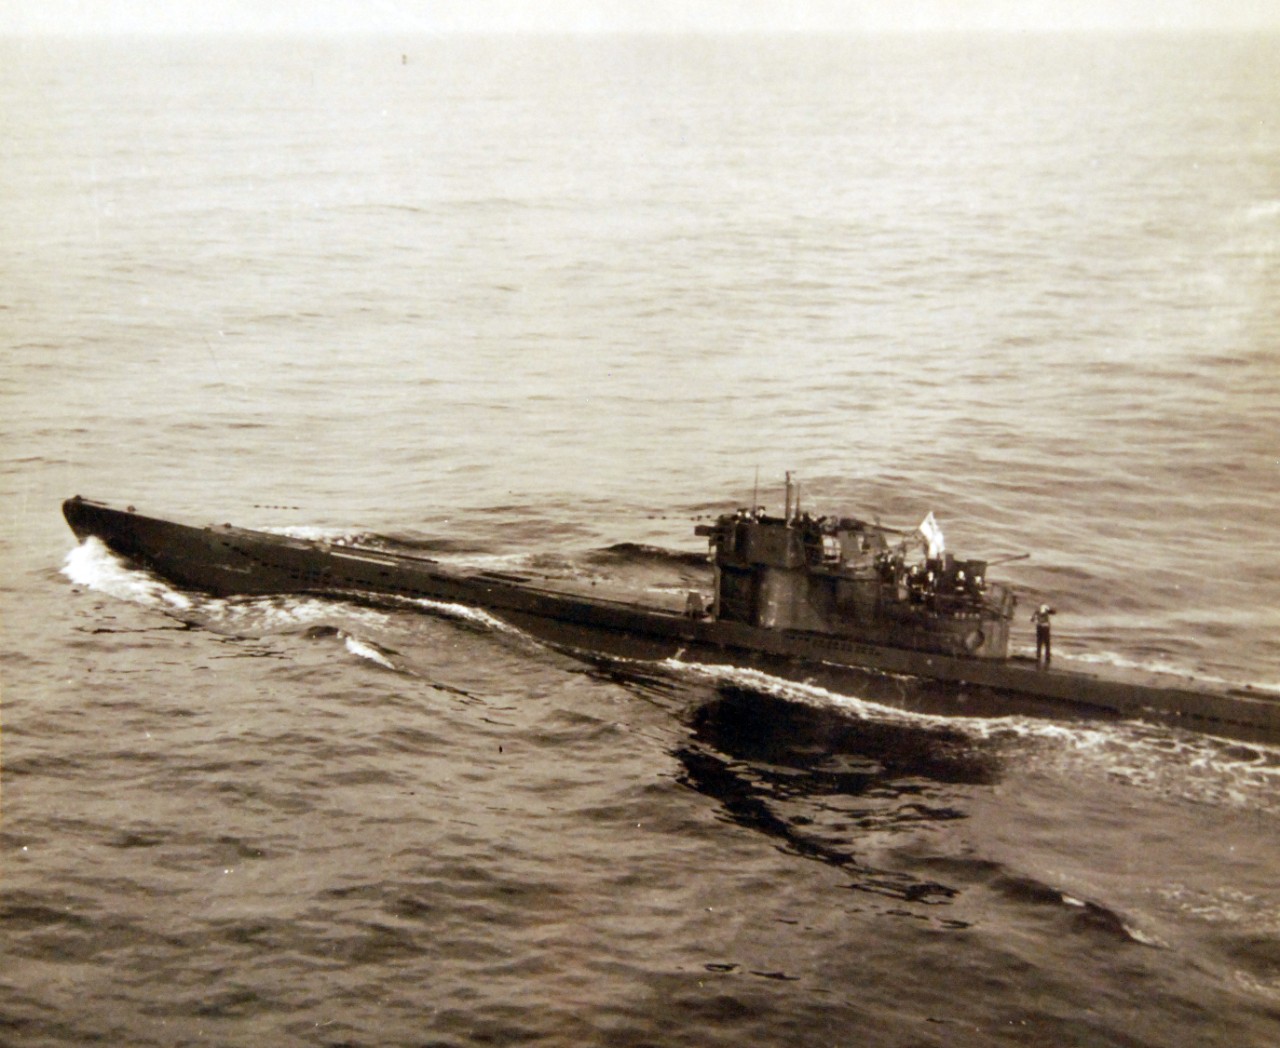 80-G-320287: Surrender of German U-boats, WWII.  U-249 surrendering on May 9, 1945.   U-249 was the first U-boat to surrender after Germany’s surrender.   The submarine surrendered to a PB4Y-1 “Liberator” from FAW-7 off Scilly Islands.  Official U.S. Navy photograph, now in the collections of the National Archives.  (2017/07/18).